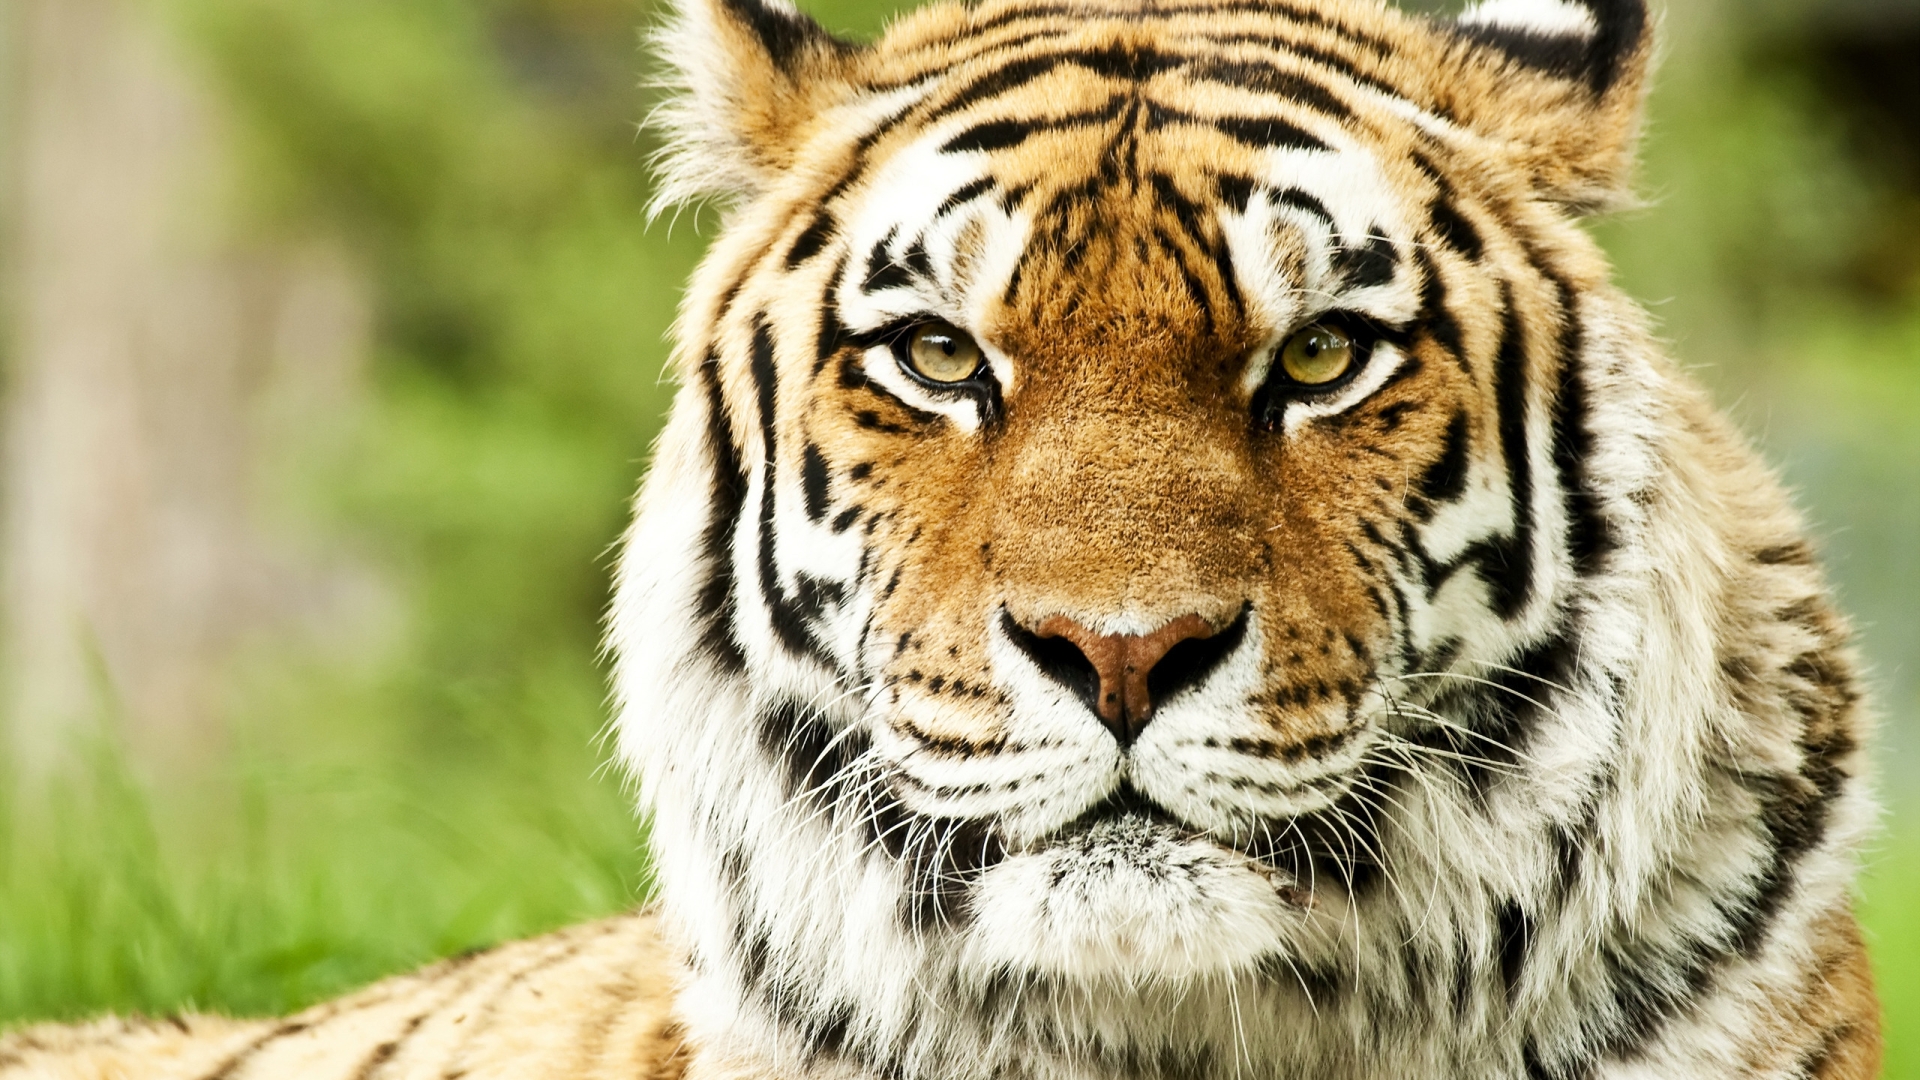 Premium AI Image | Tiger face wallpapers for iphone and android. browse and  enjoy our collection of wallpapers. tiger face wallpaper, tiger face  wallpaper, tiger wallpaper, tiger wallpaper